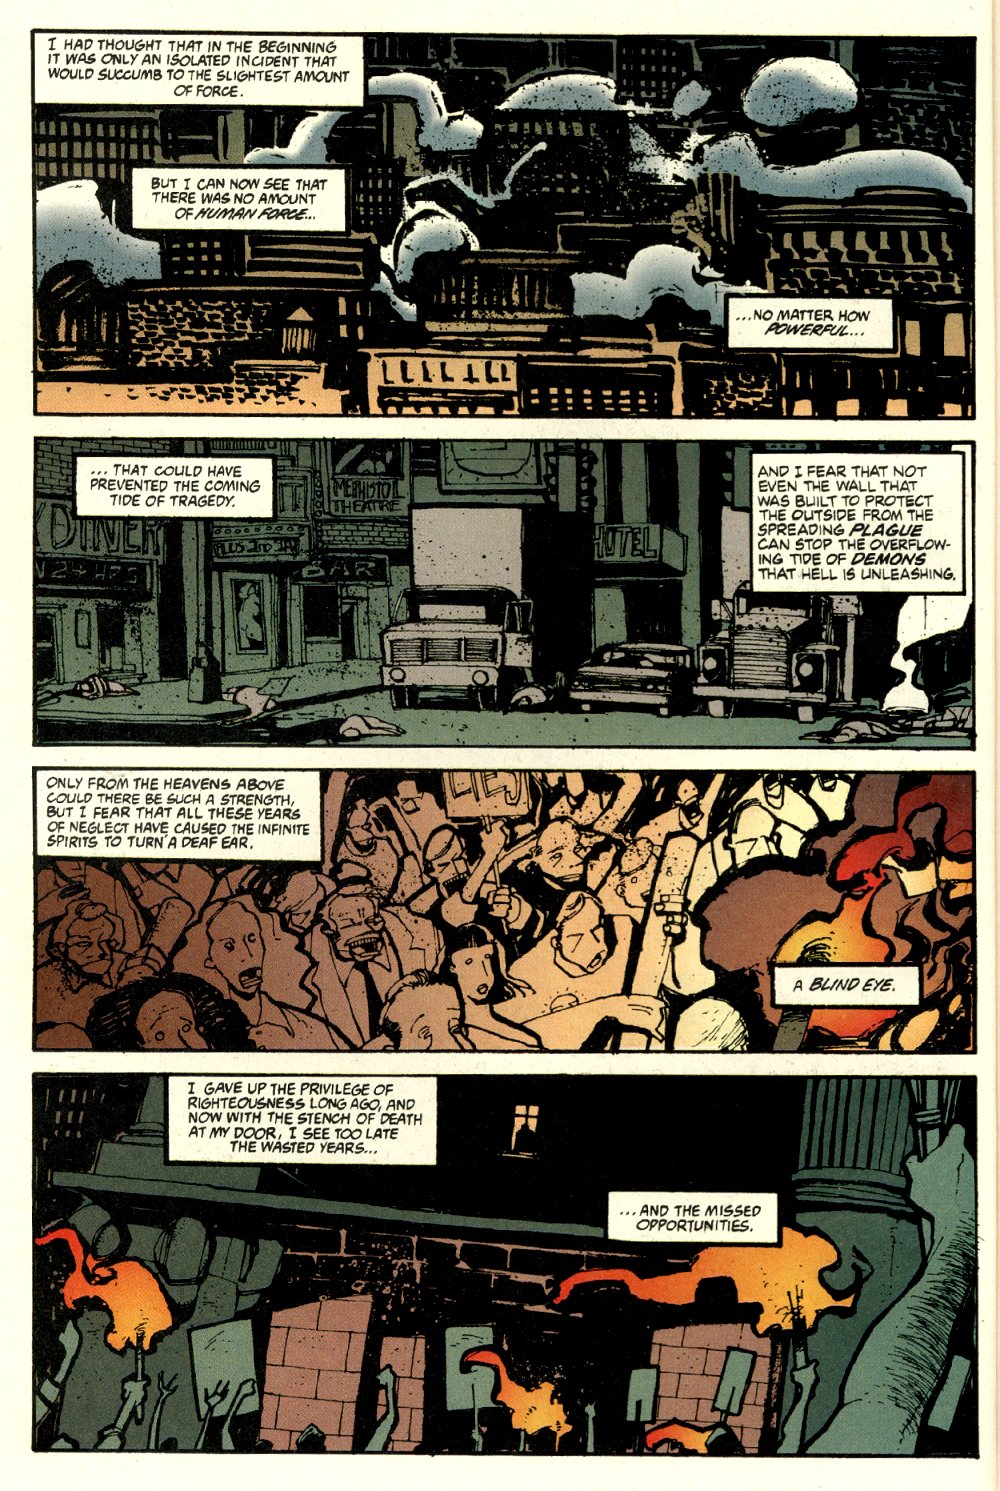 Read online Ted McKeever's Metropol comic -  Issue #9 - 4